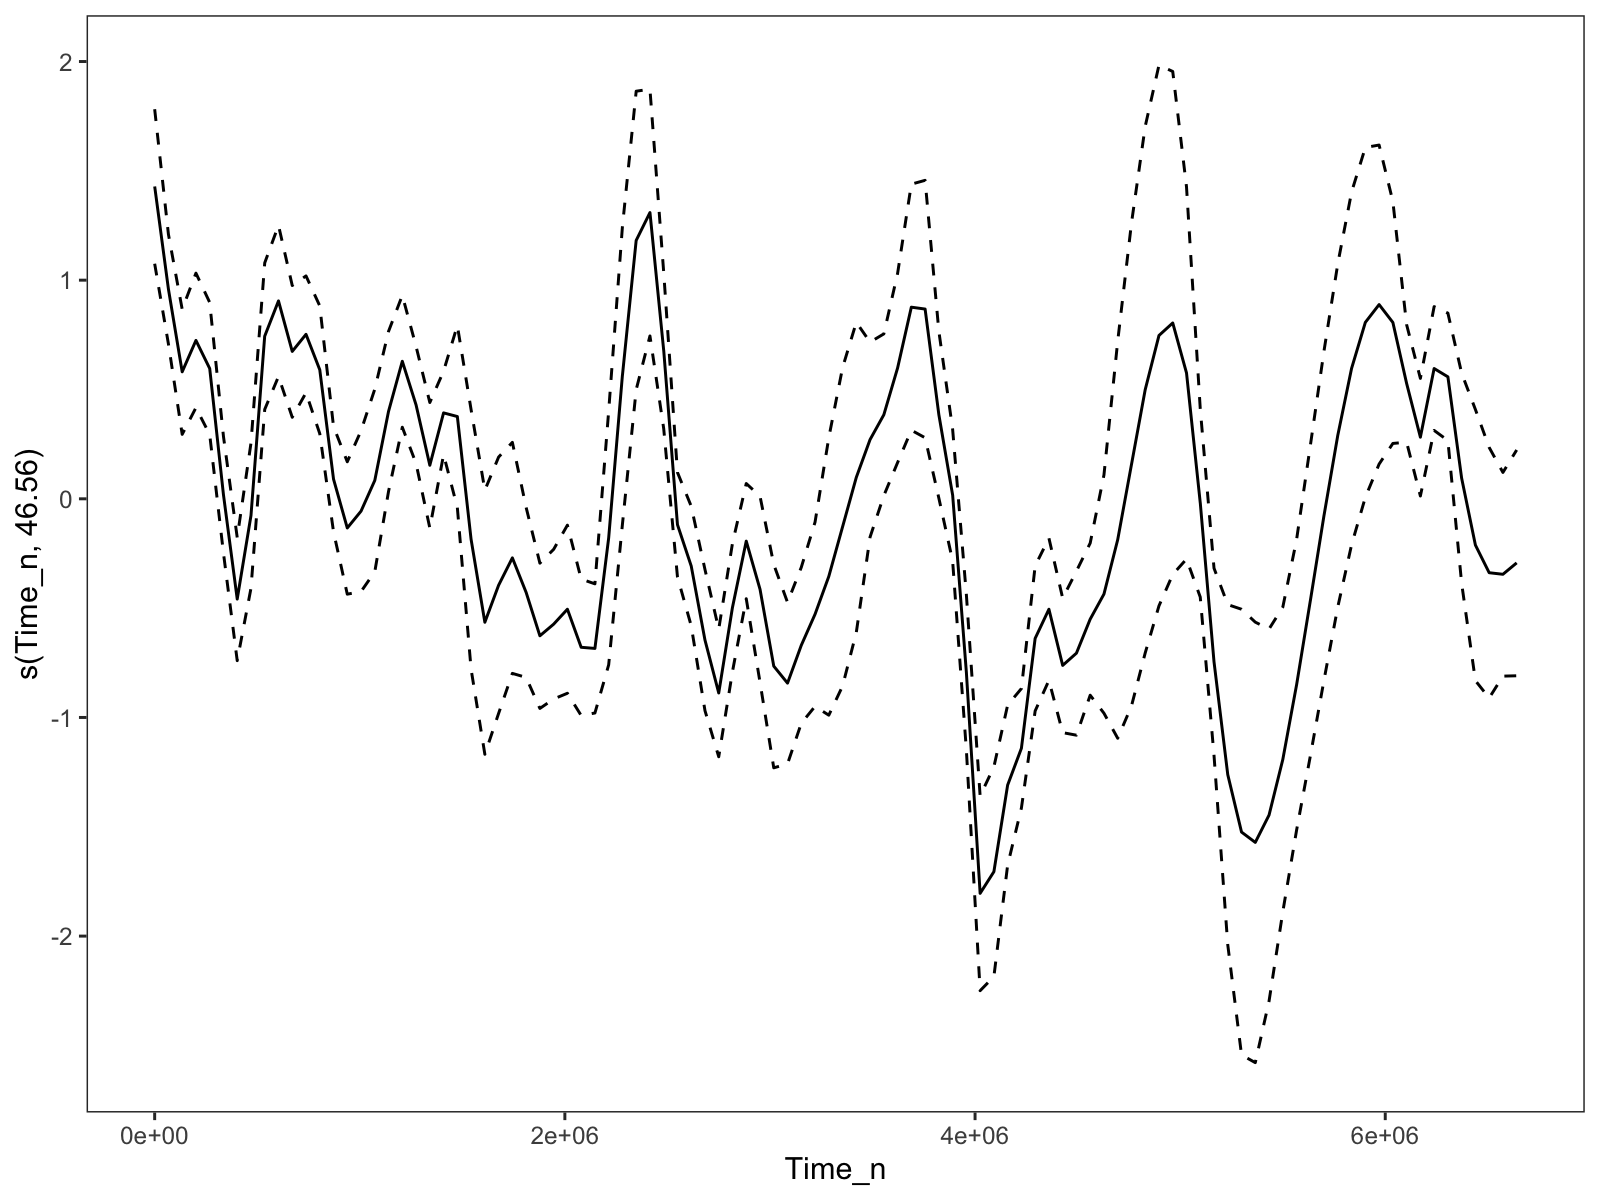 The time trend when the `k` parameter for the time smooth is set to 60. Much too wiggly.